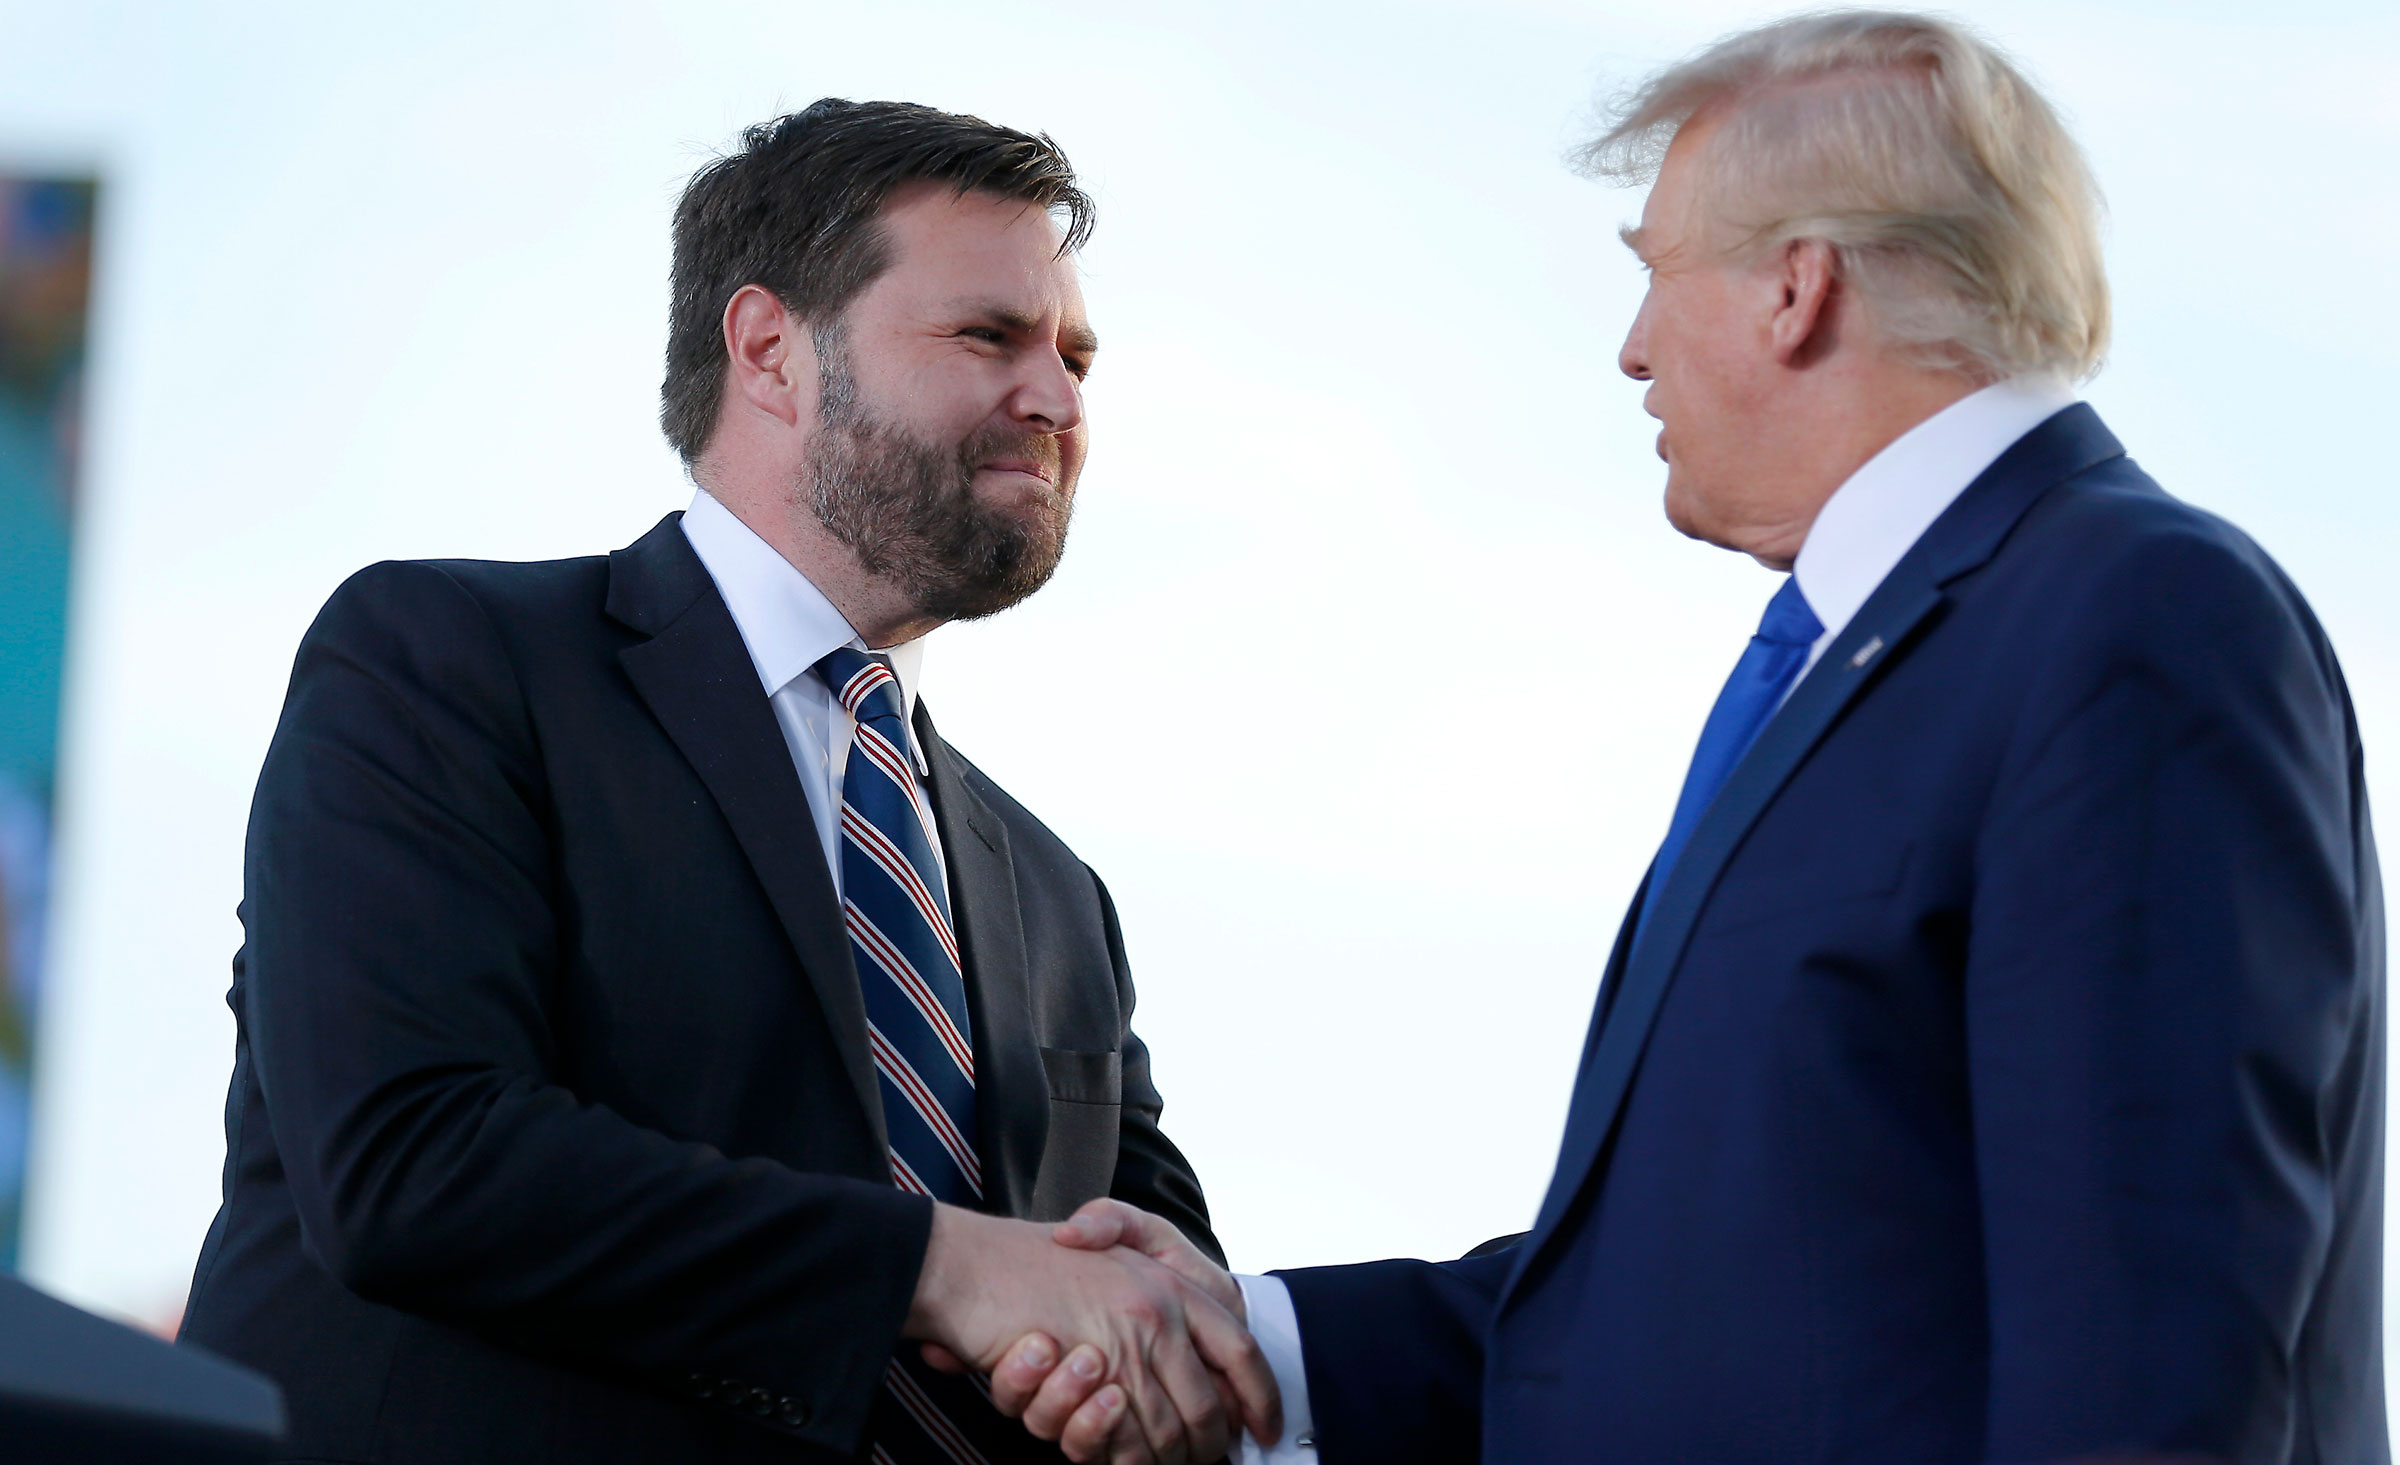 Senate candidate J.D. Vance, left, greets former President Donald Trump at a rally in Delaware, Ohio, last month.